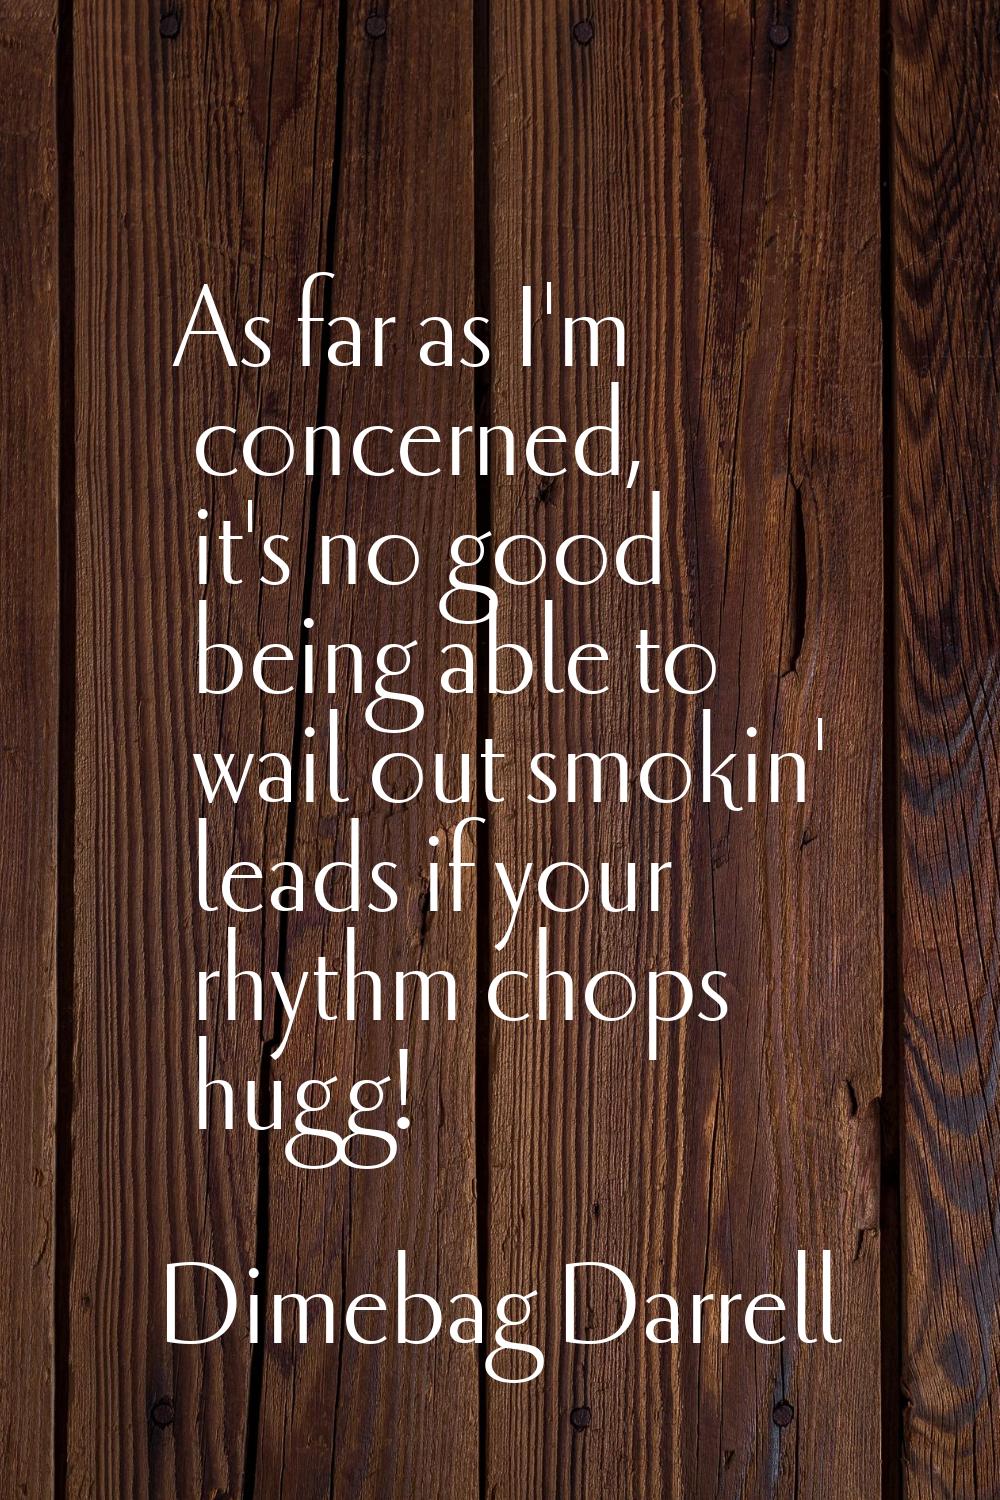 As far as I'm concerned, it's no good being able to wail out smokin' leads if your rhythm chops hug